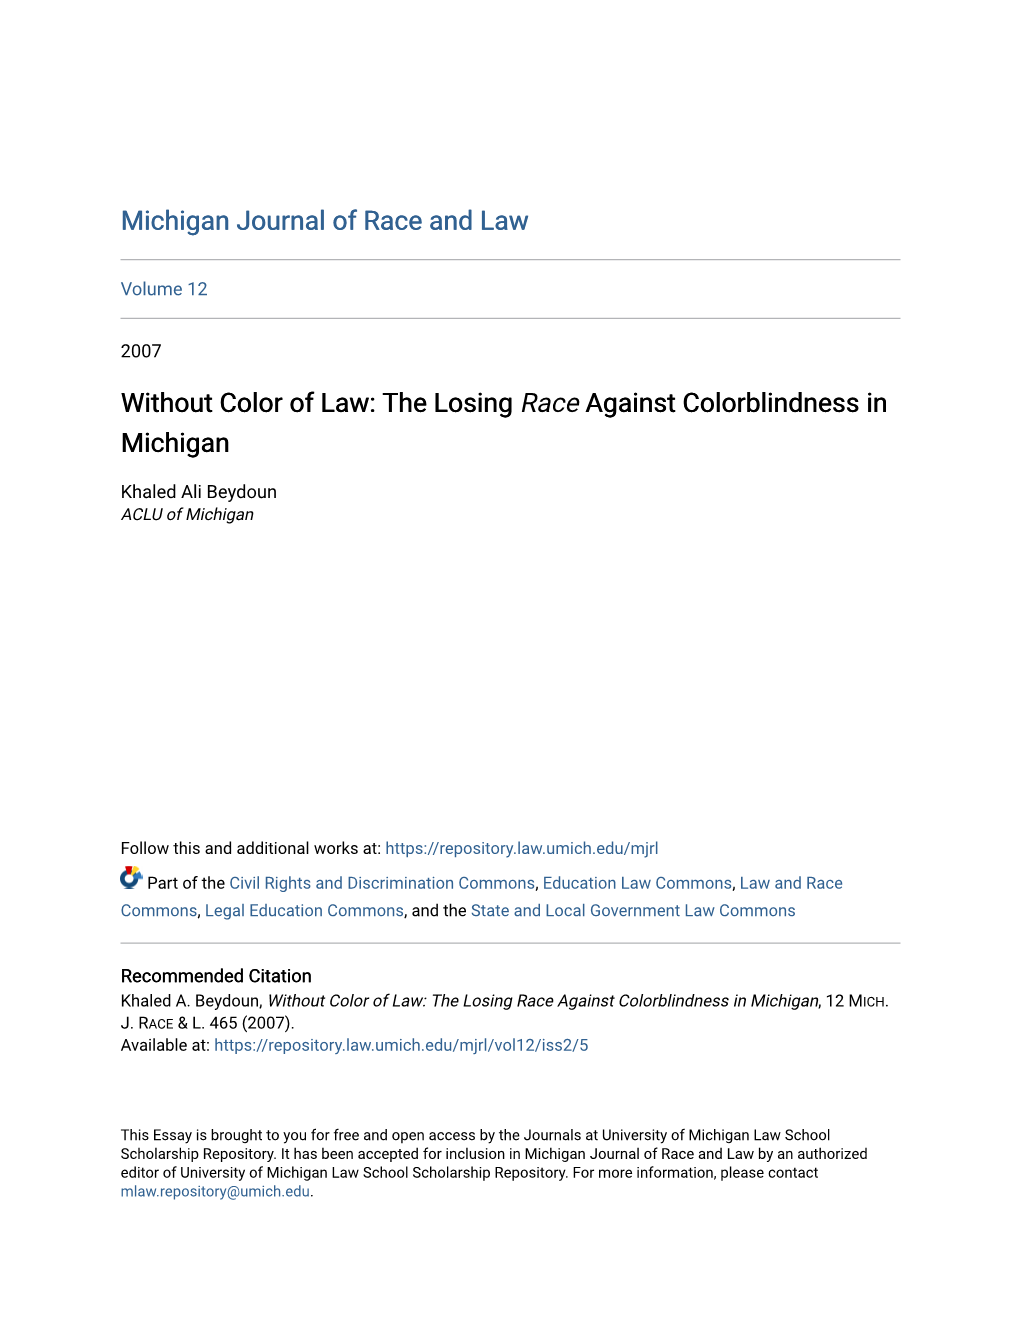 Without Color of Law: the Losing Race Against Colorblindness in Michigan